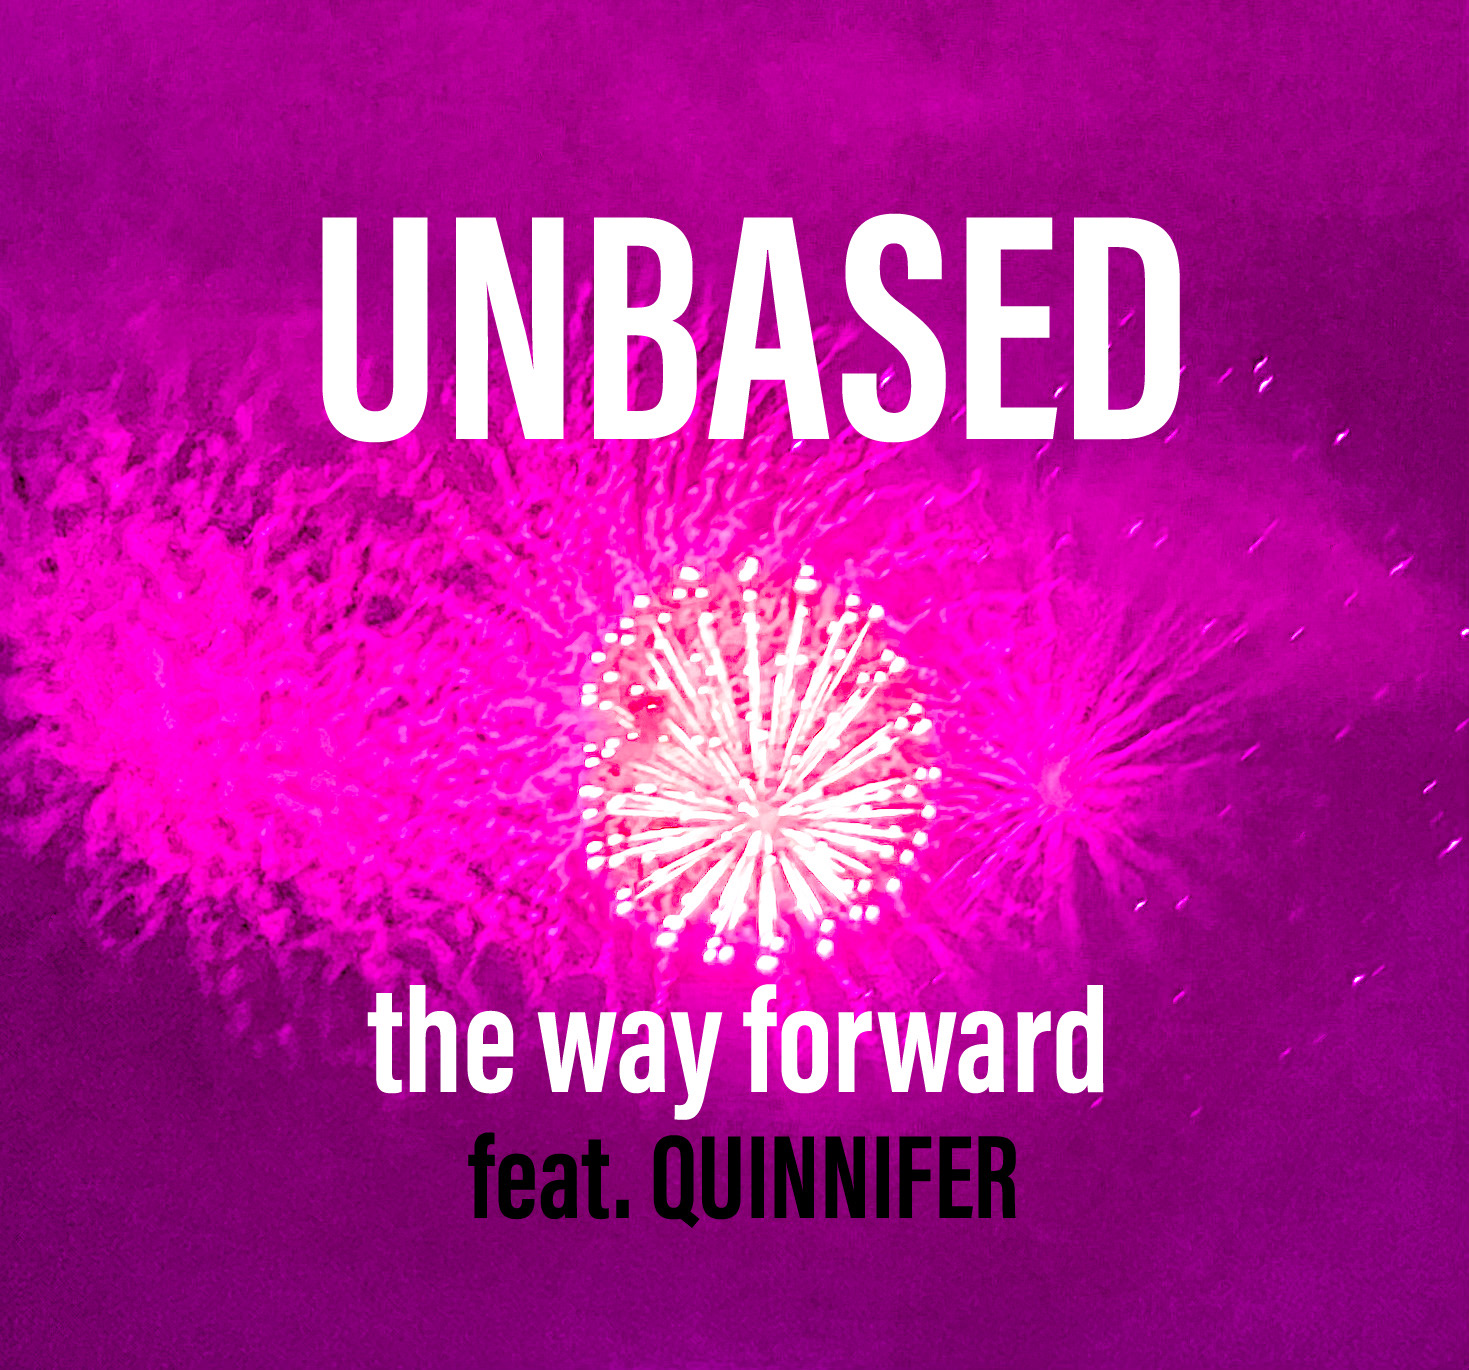 unbased ft. featuring Quinnifer the way forward cover artwork